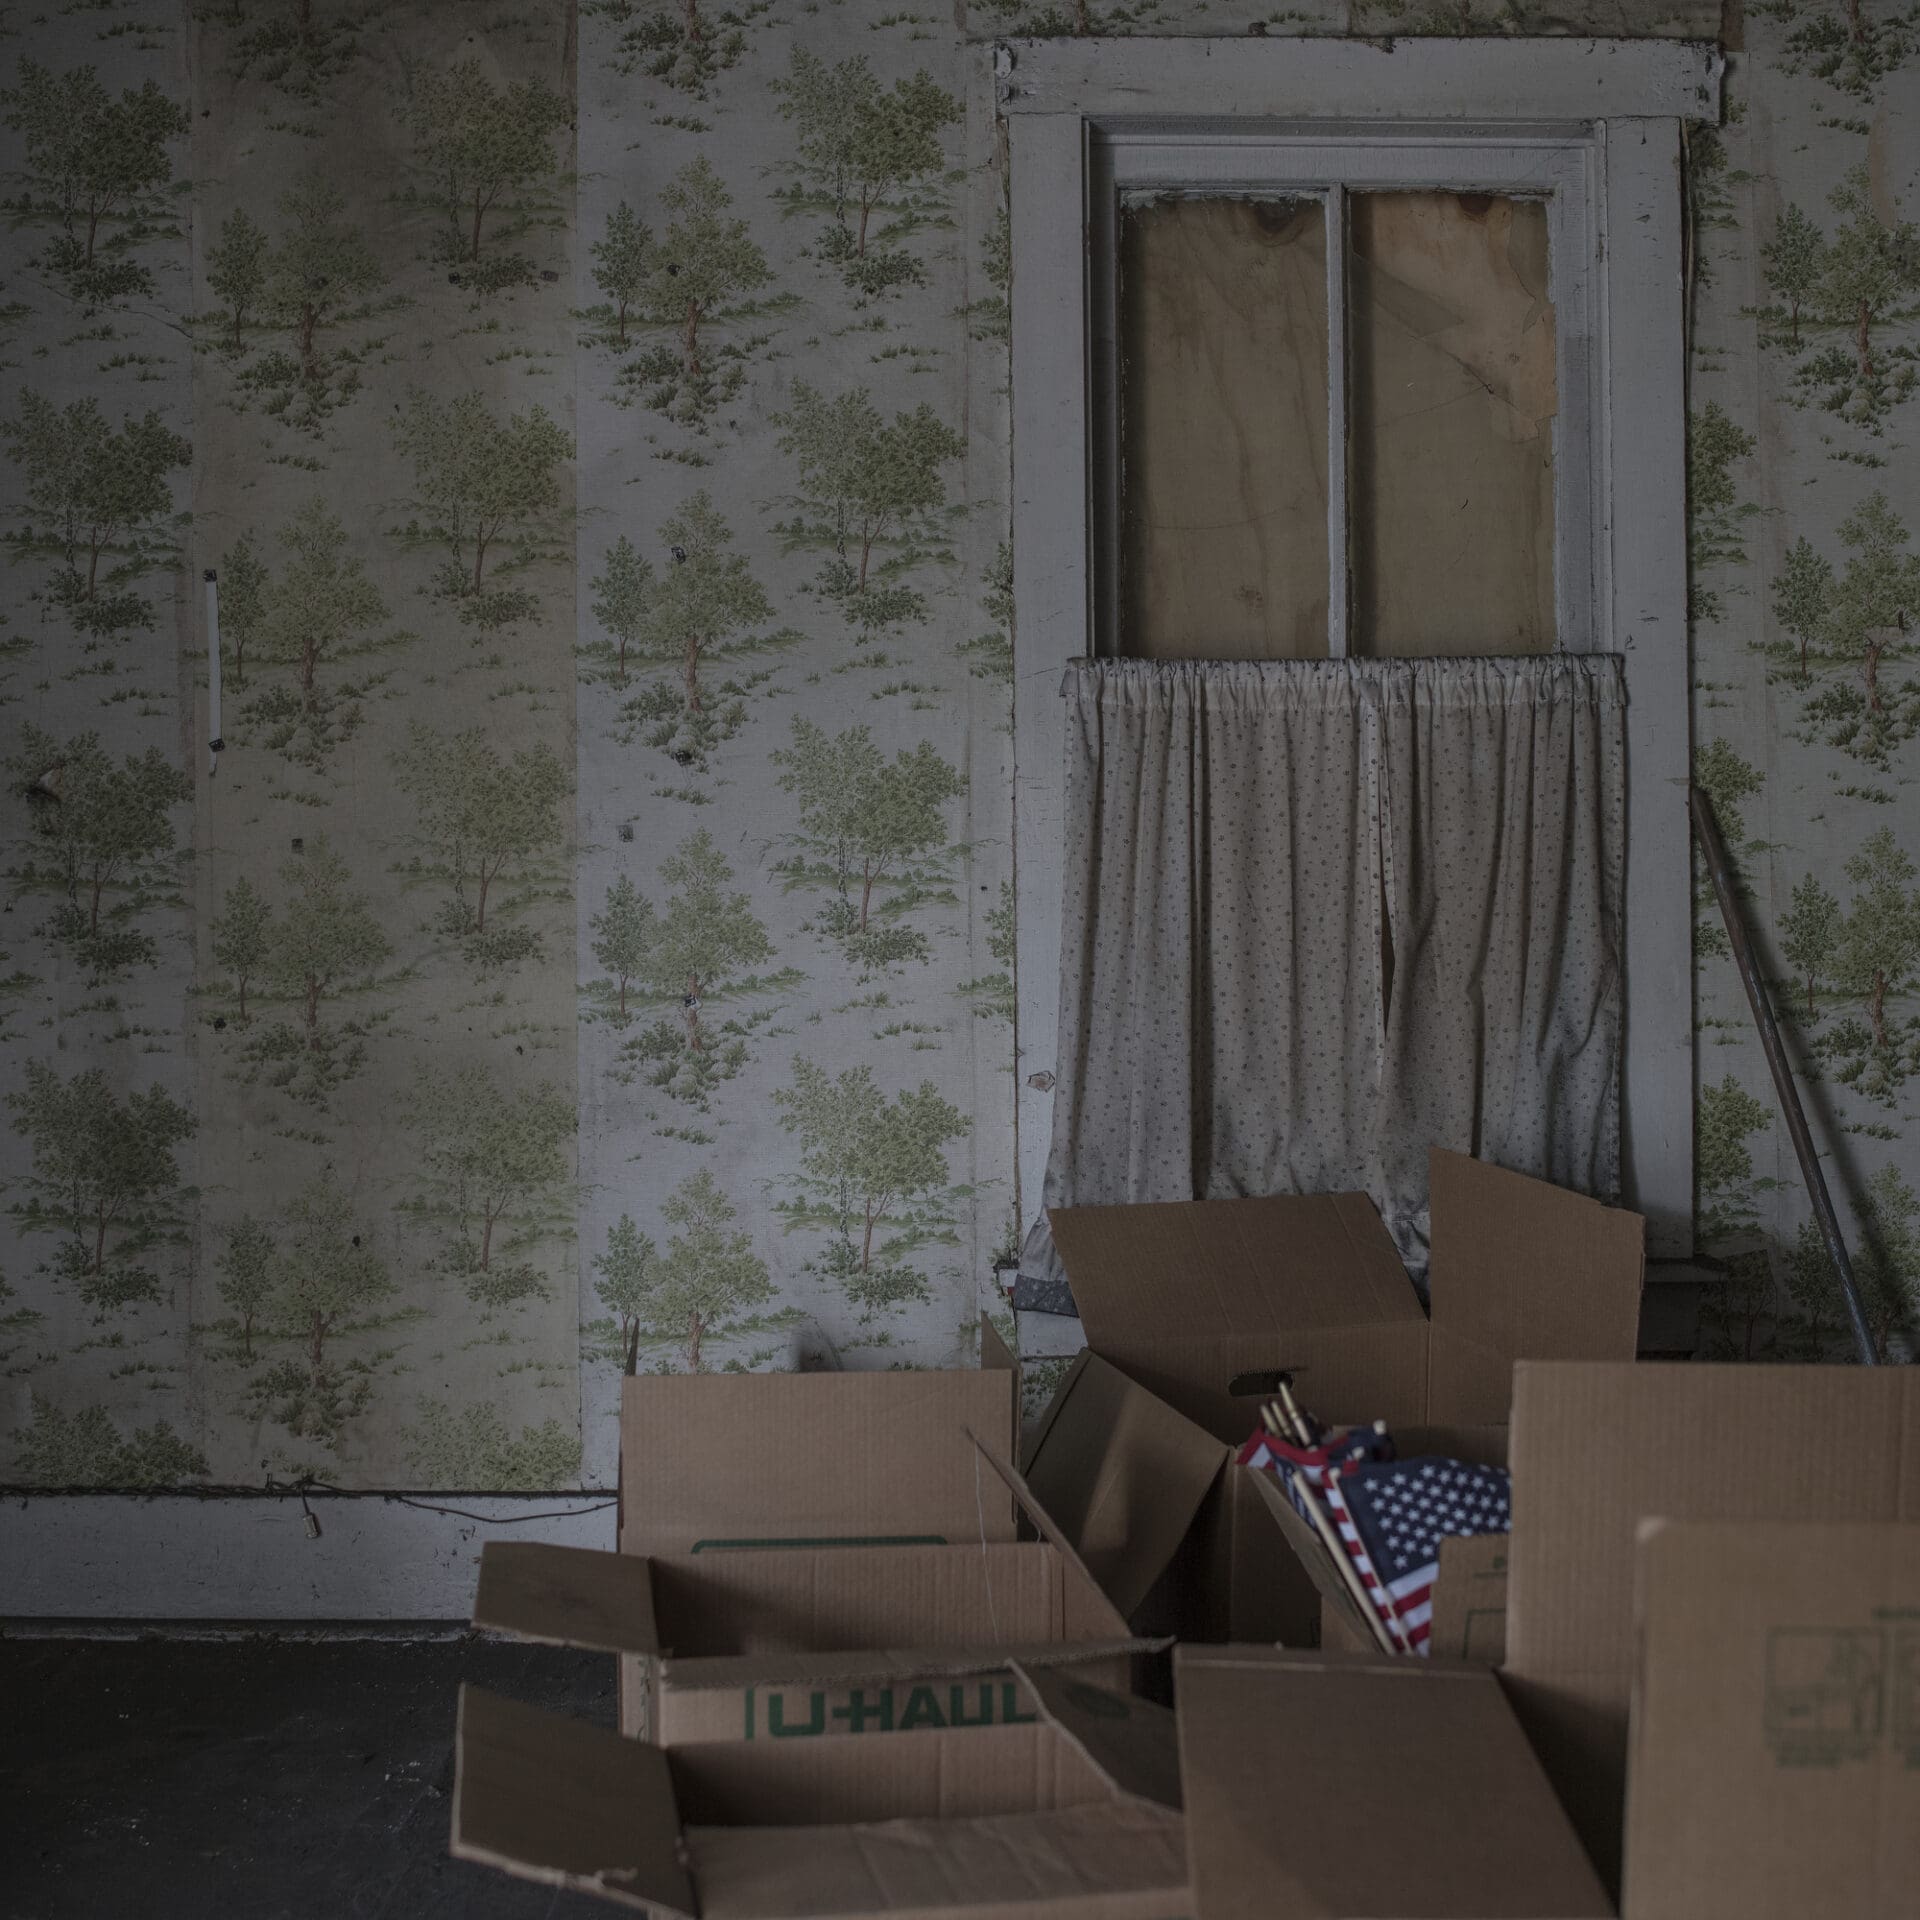 Photographer Rich-Joseph Facun | empty battered cardboard boxes sit in front of peeling, patterned green wallpaper and a boarded up sash window